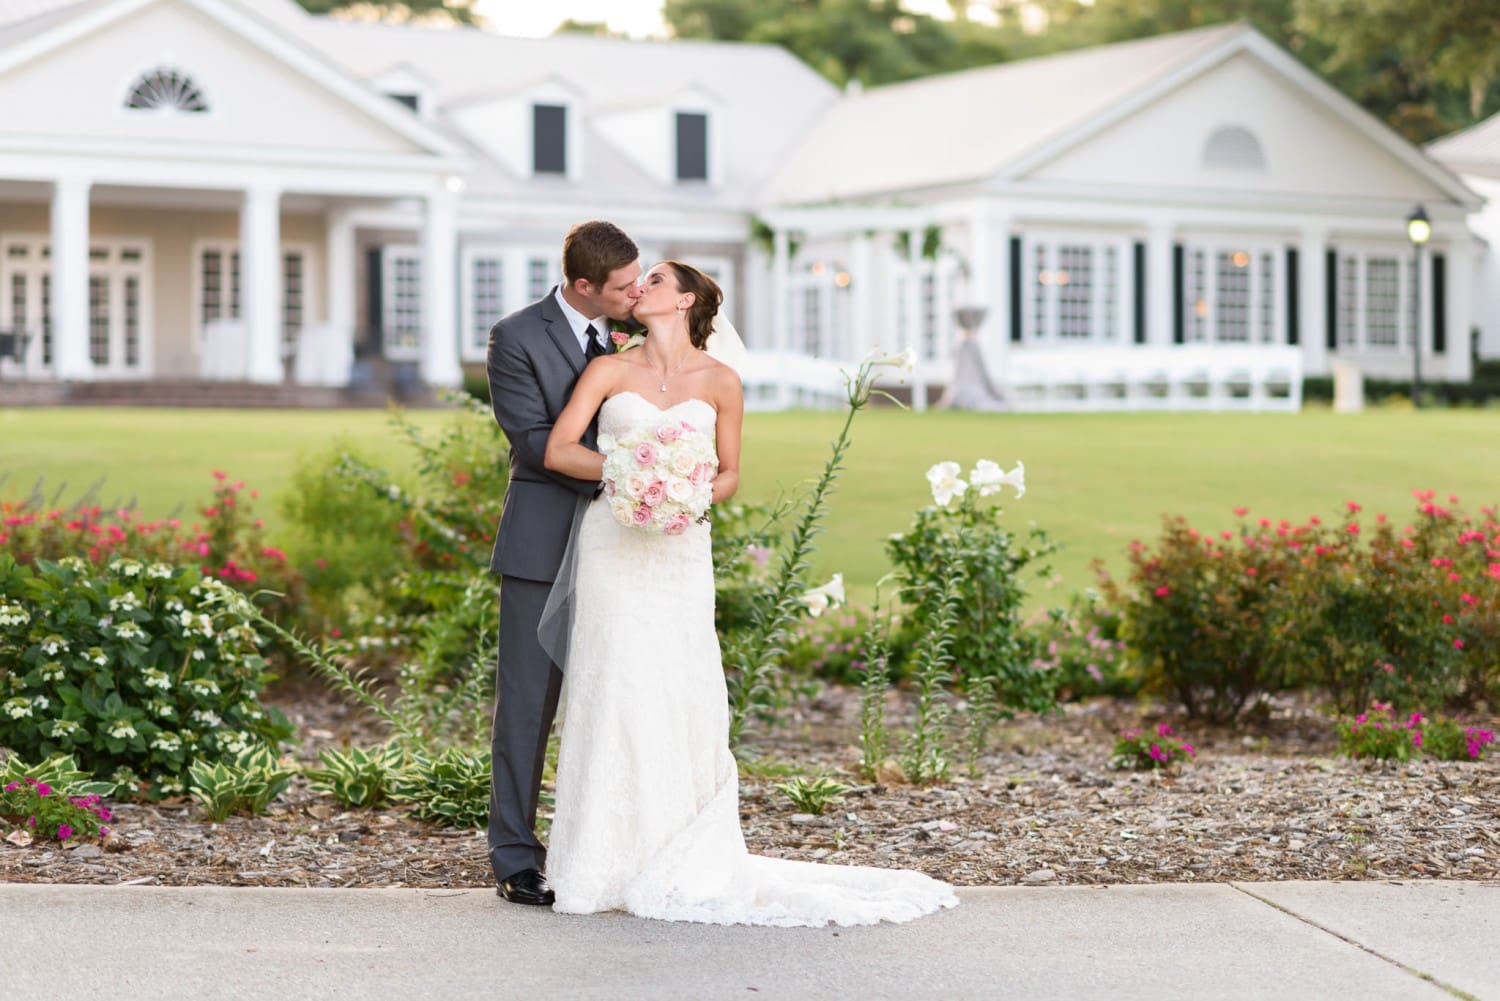 Kiss behind clubhouse - Pawleys Plantation